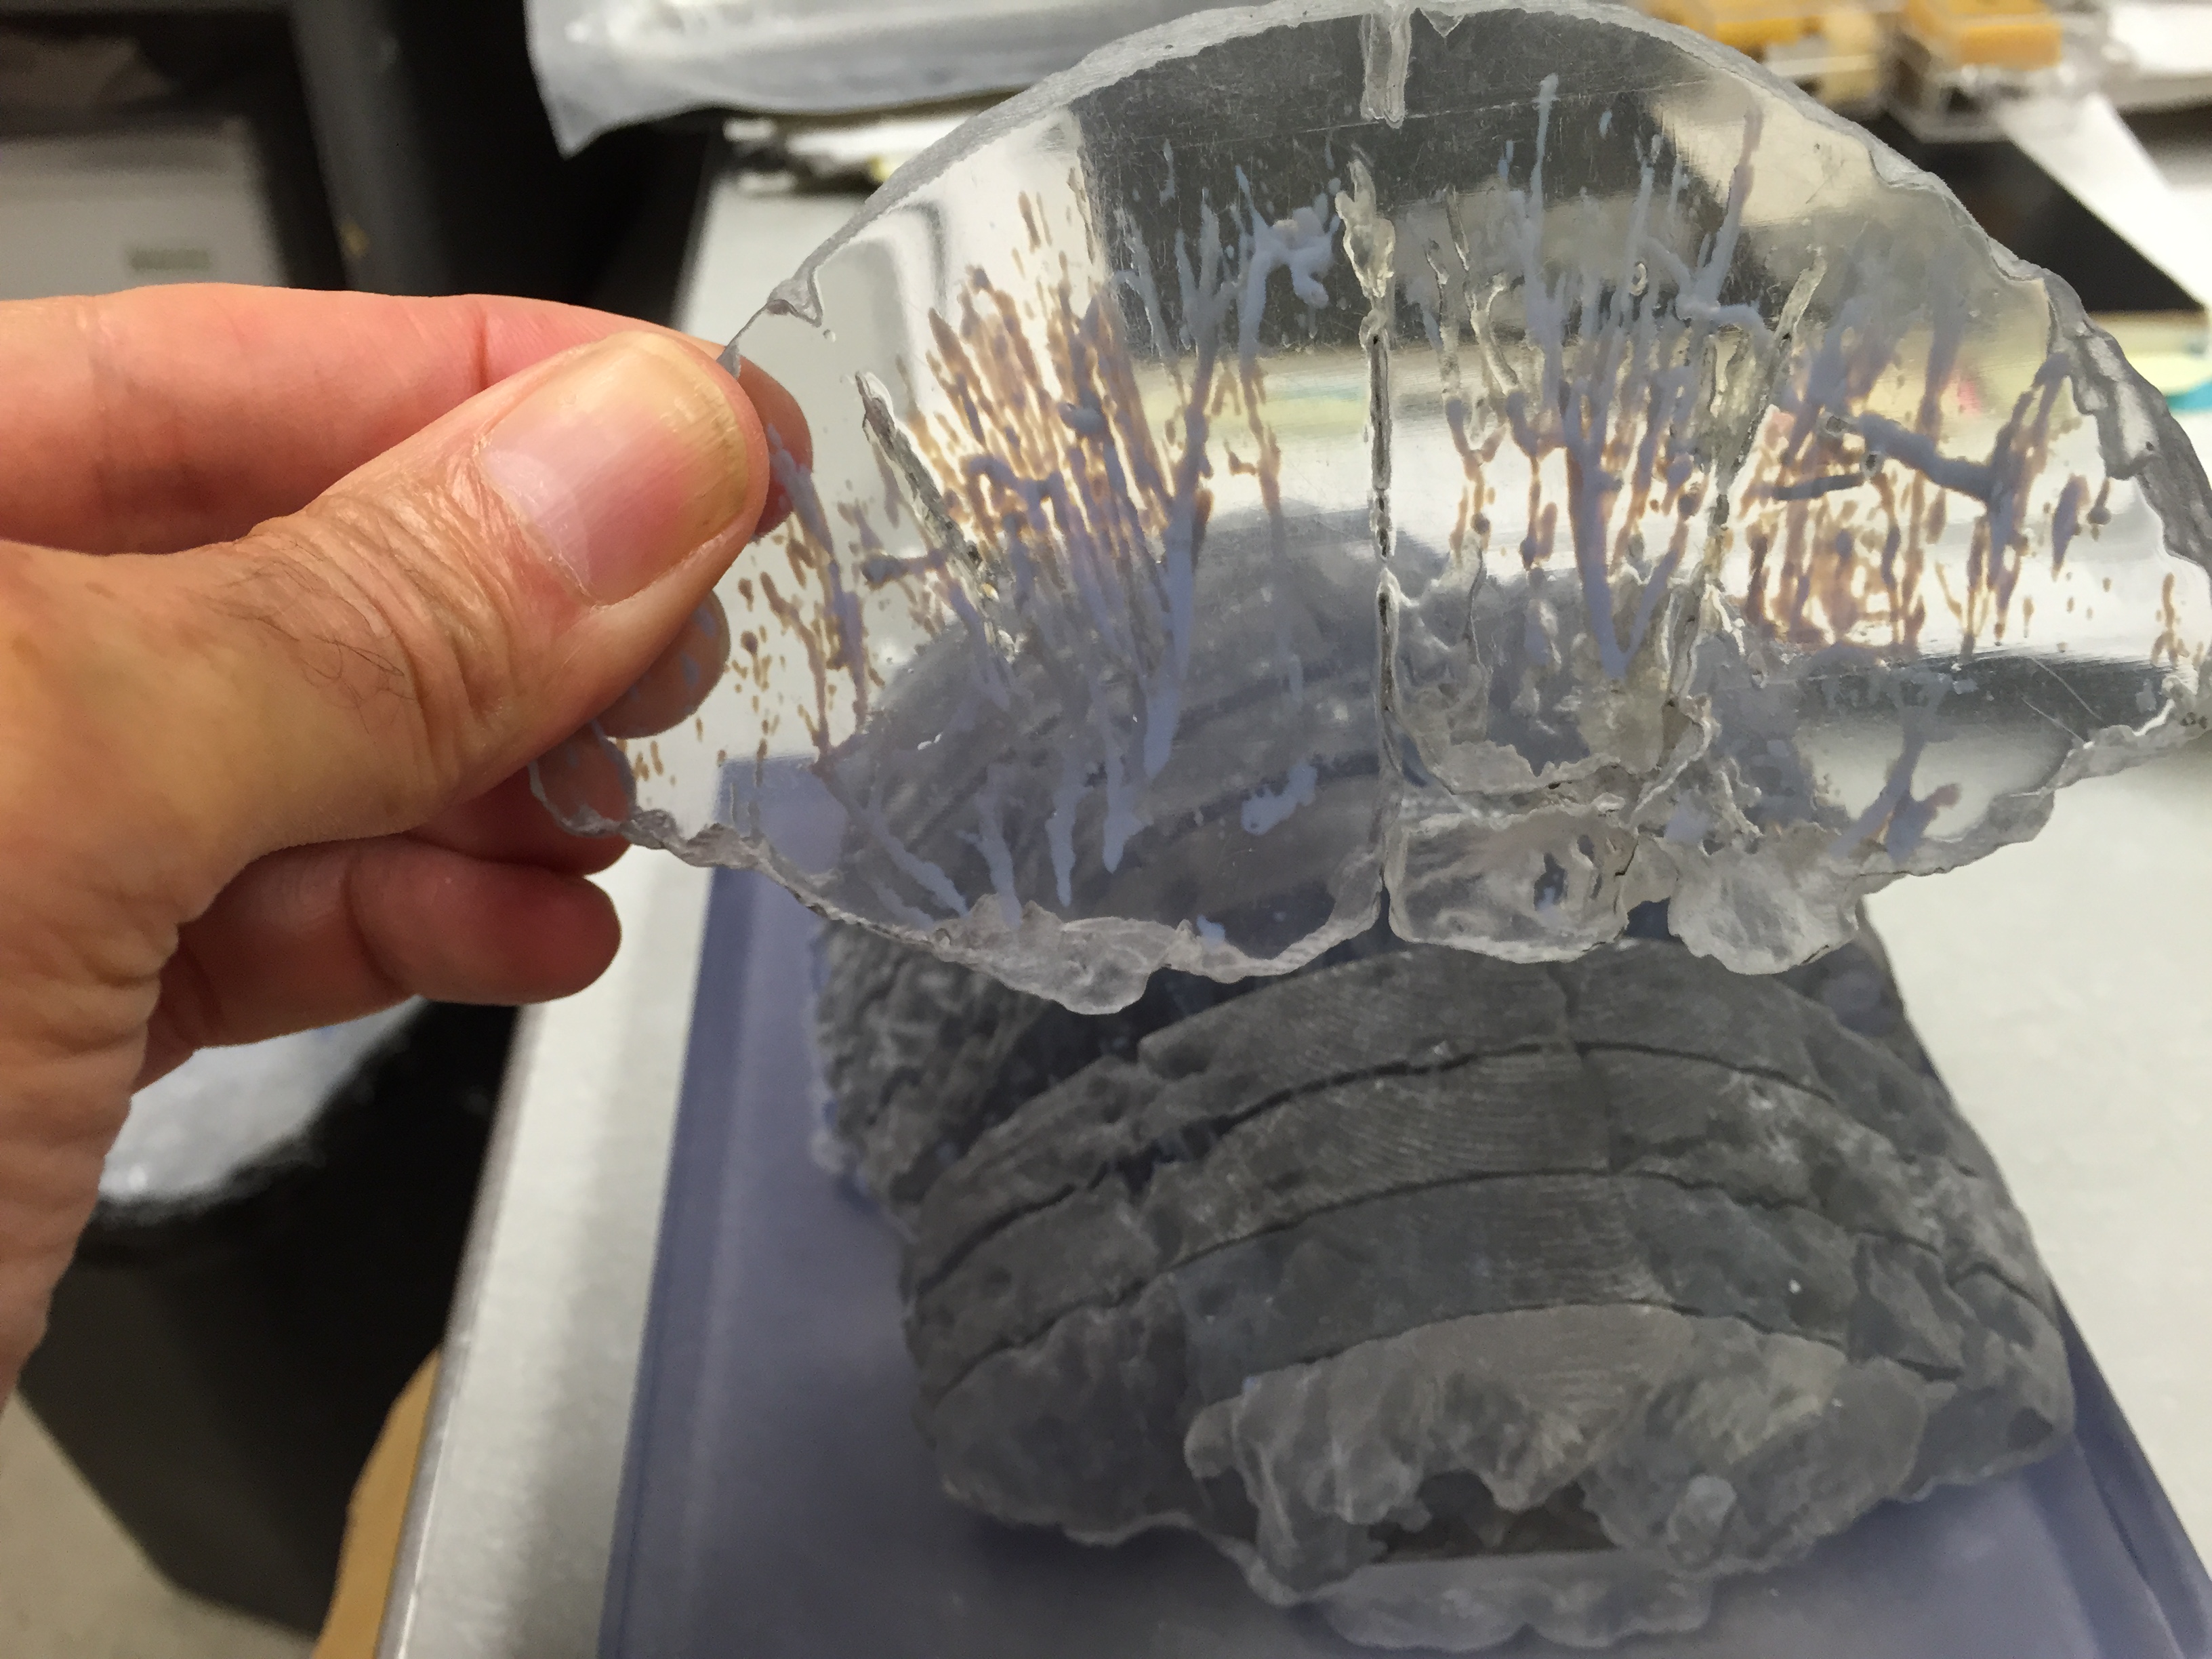 3-D printed sections of a pachycephalosaur fossil